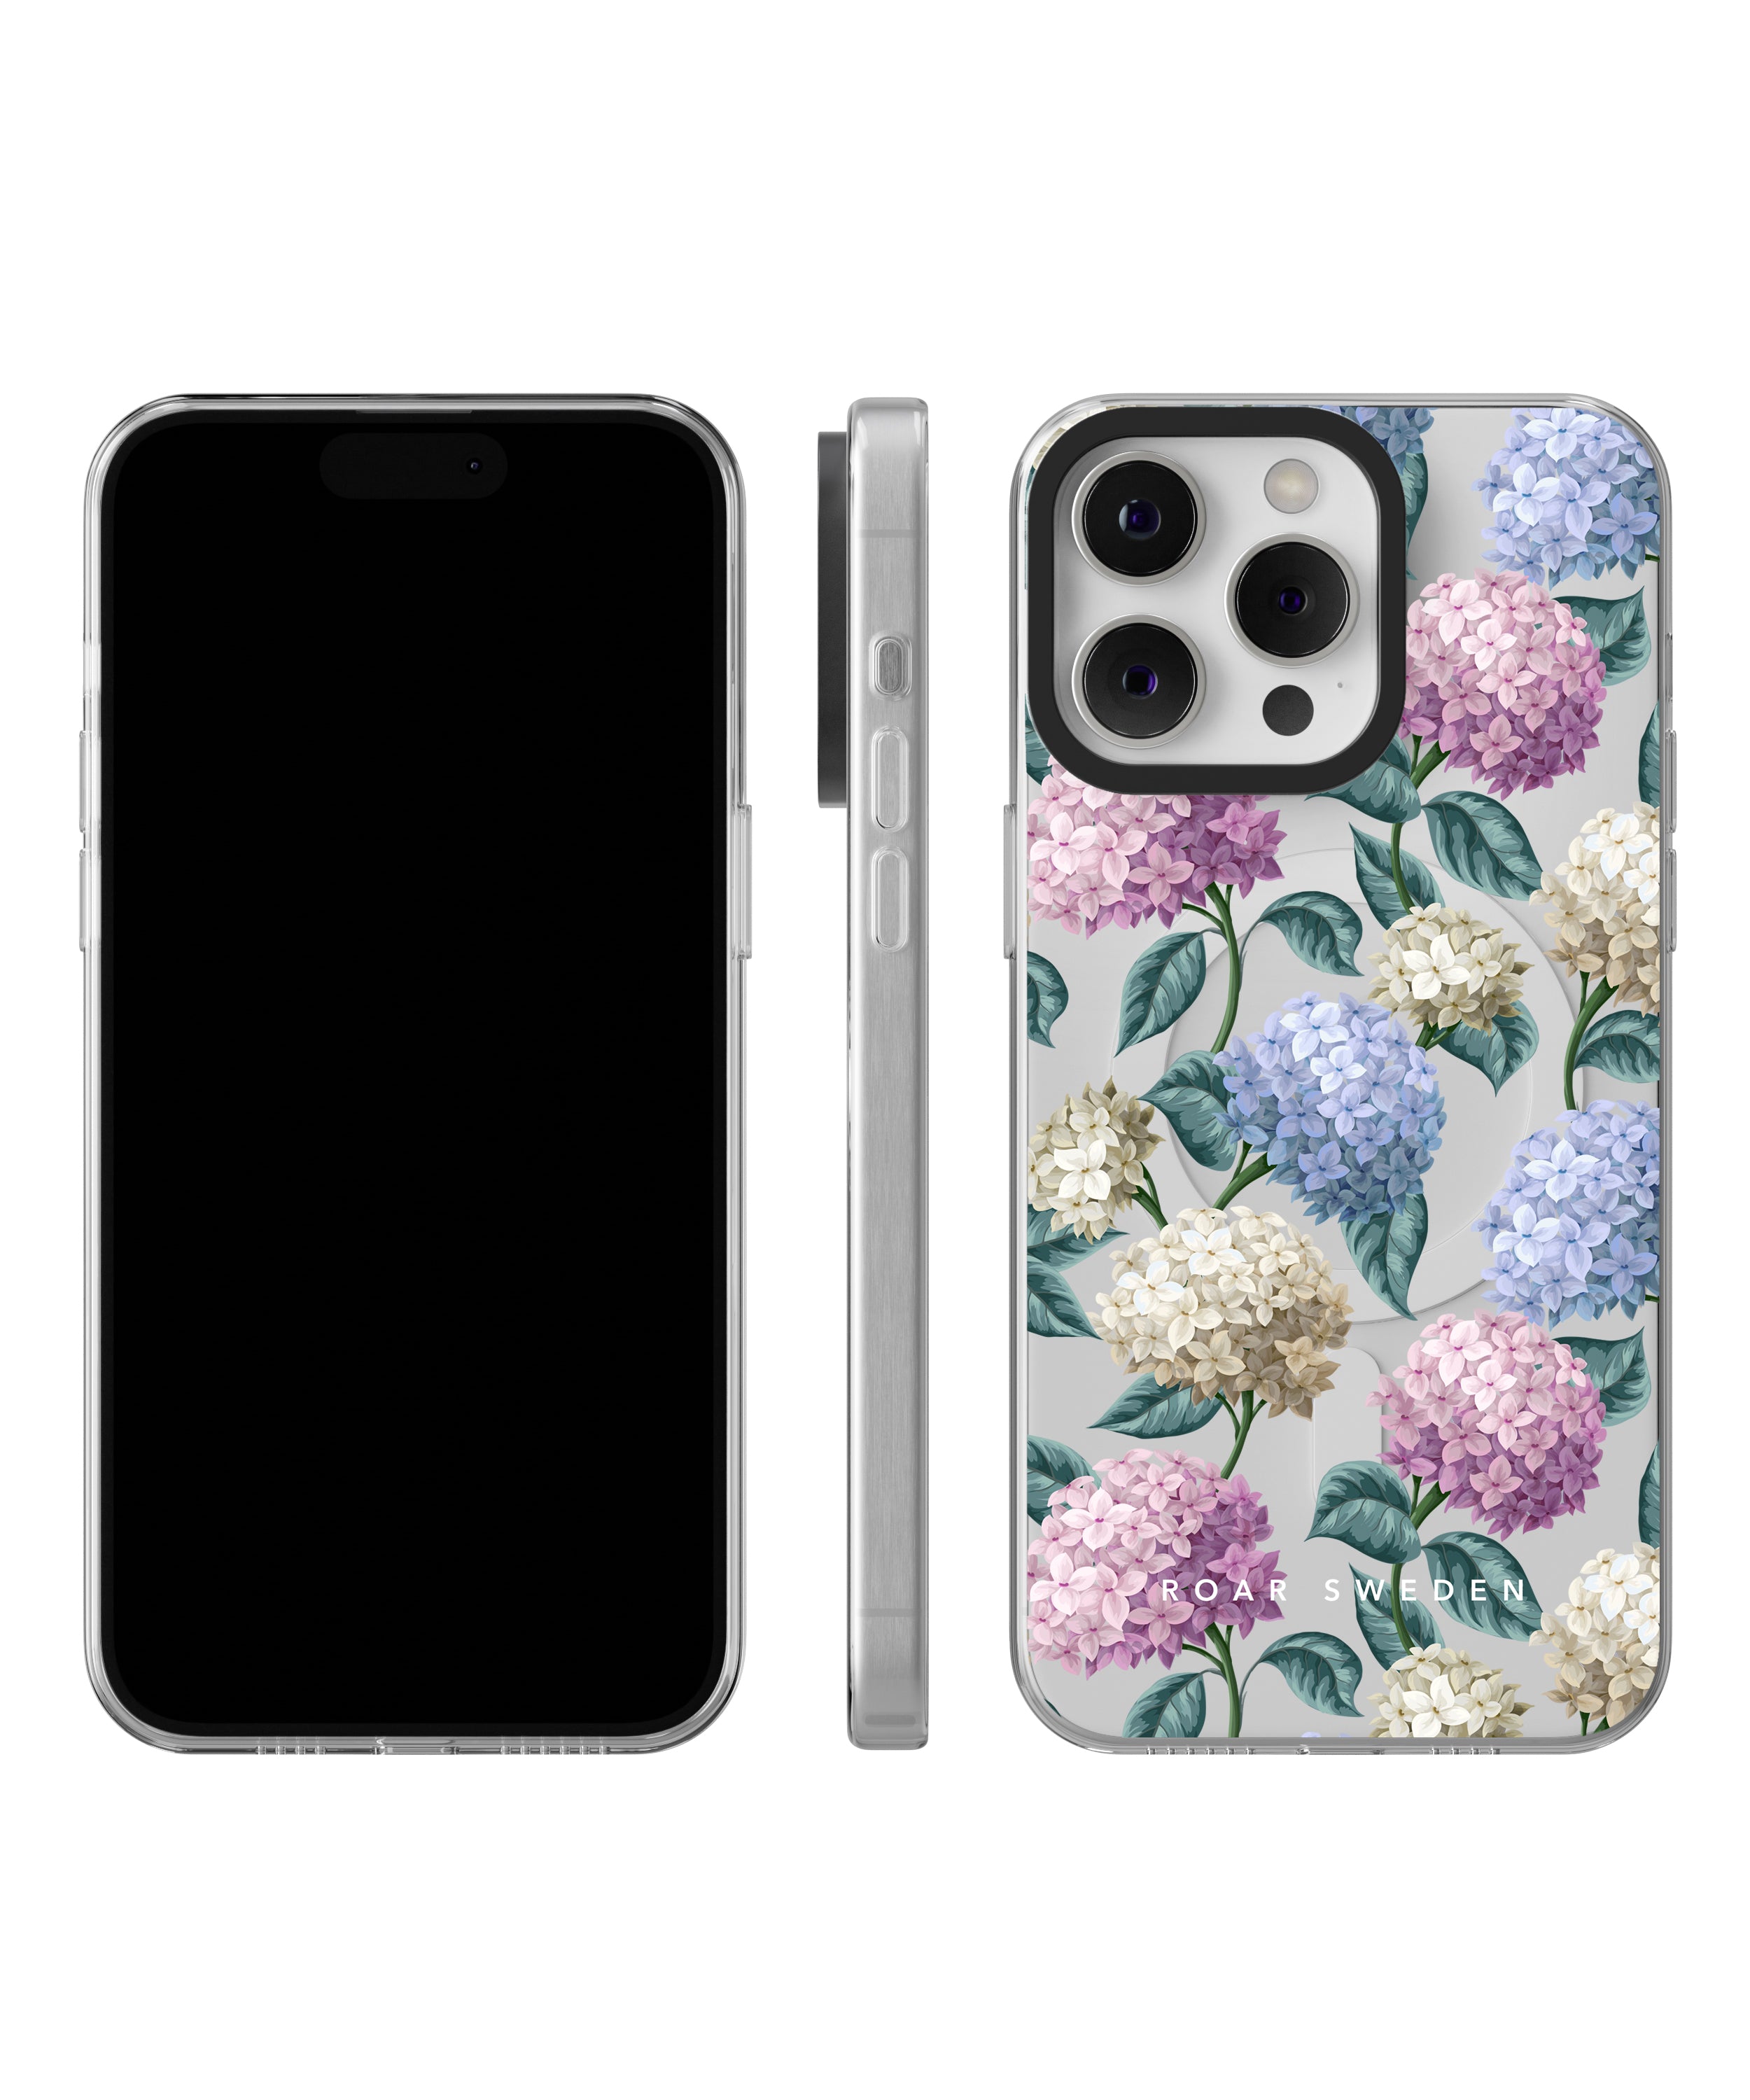 A smartphone shown from front, side, and back views. The back features a stunning Hydrangea - MagSafe adorned with colorful hydrangeas and green leaves, part of the exclusive Floral Collection.